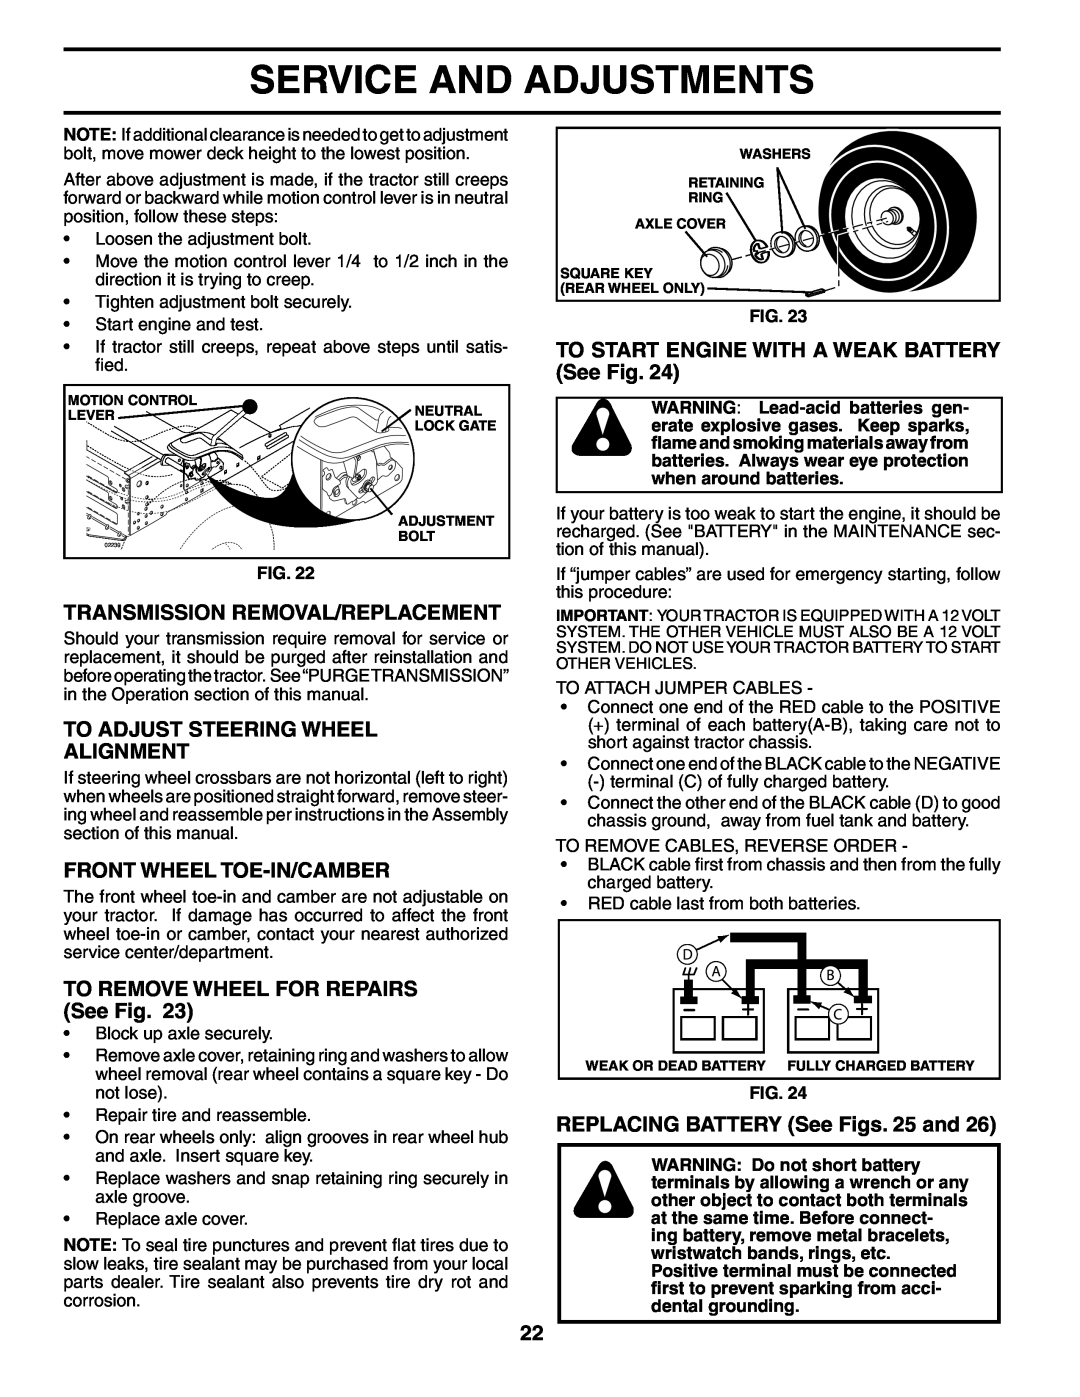 Poulan PO175H42STB manual Transmission Removal/Replacement, To Adjust Steering Wheel Alignment, Front Wheel Toe-In/Camber 